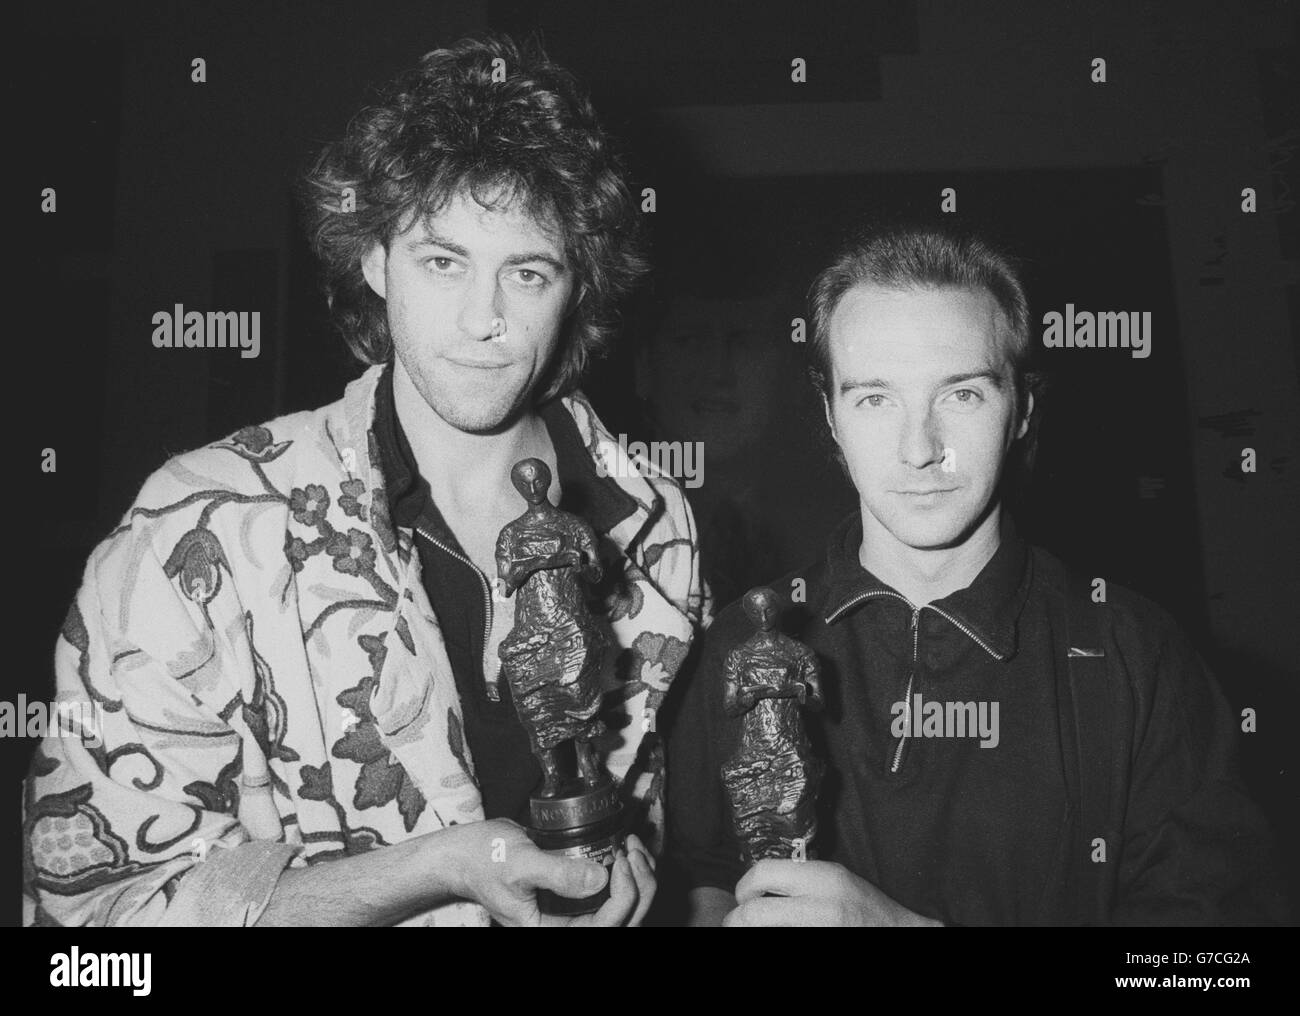 Midge Ure (R), 31, of the rock group Ultravox, with Bob Geldof at the Ivor Novello Awards for 1984 at the Grosvenor House Hotel, London. The pair won a joint award for the Band Aid single 'Do They Know It's Christmas?'. Stock Photo